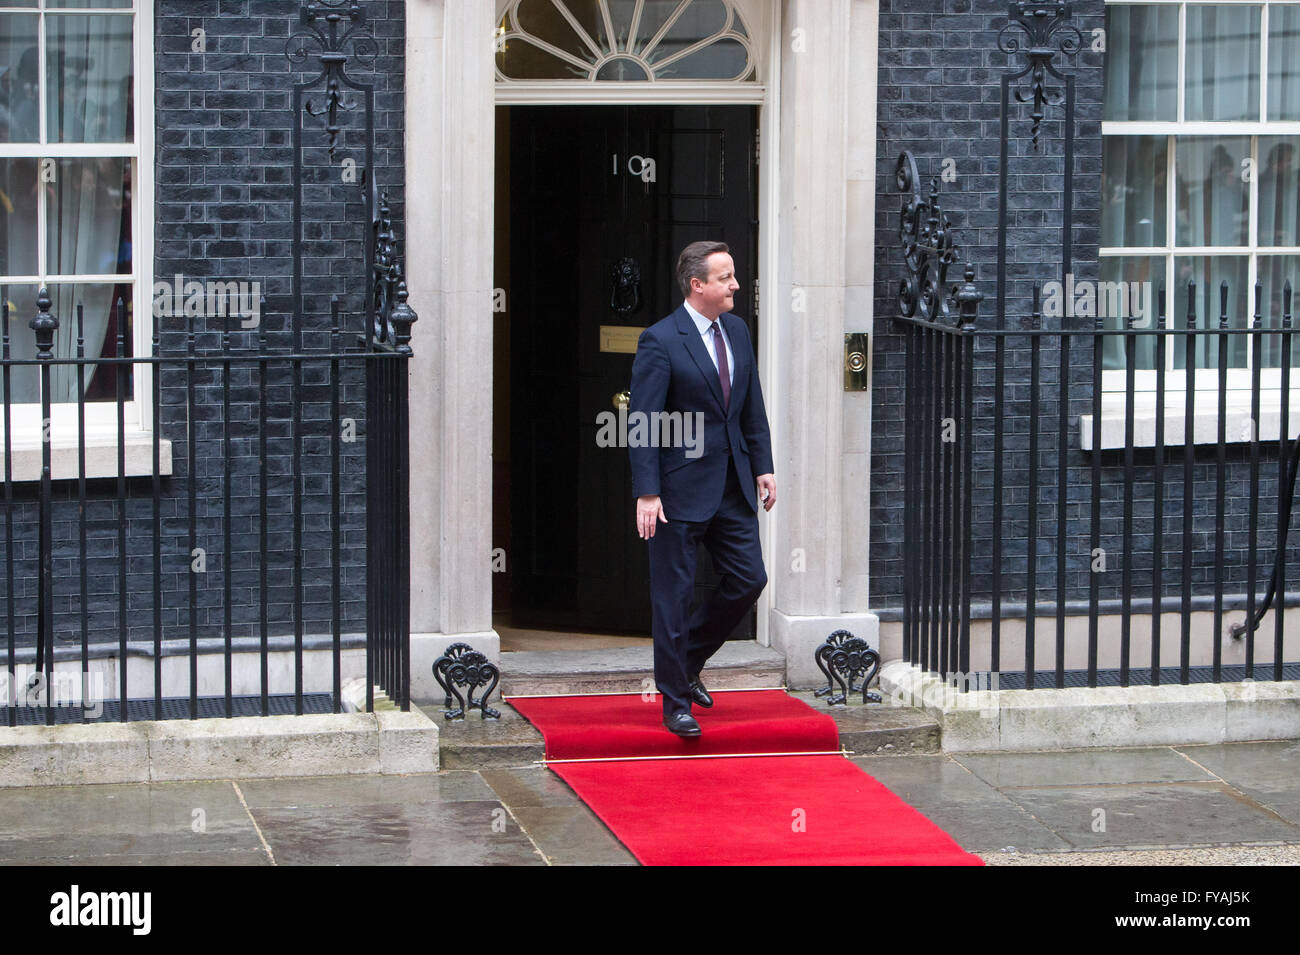 Prime Minister,David Cameron, on the doorstep of number 10 Downing Street awaiting the arrival of President Obama Stock Photo